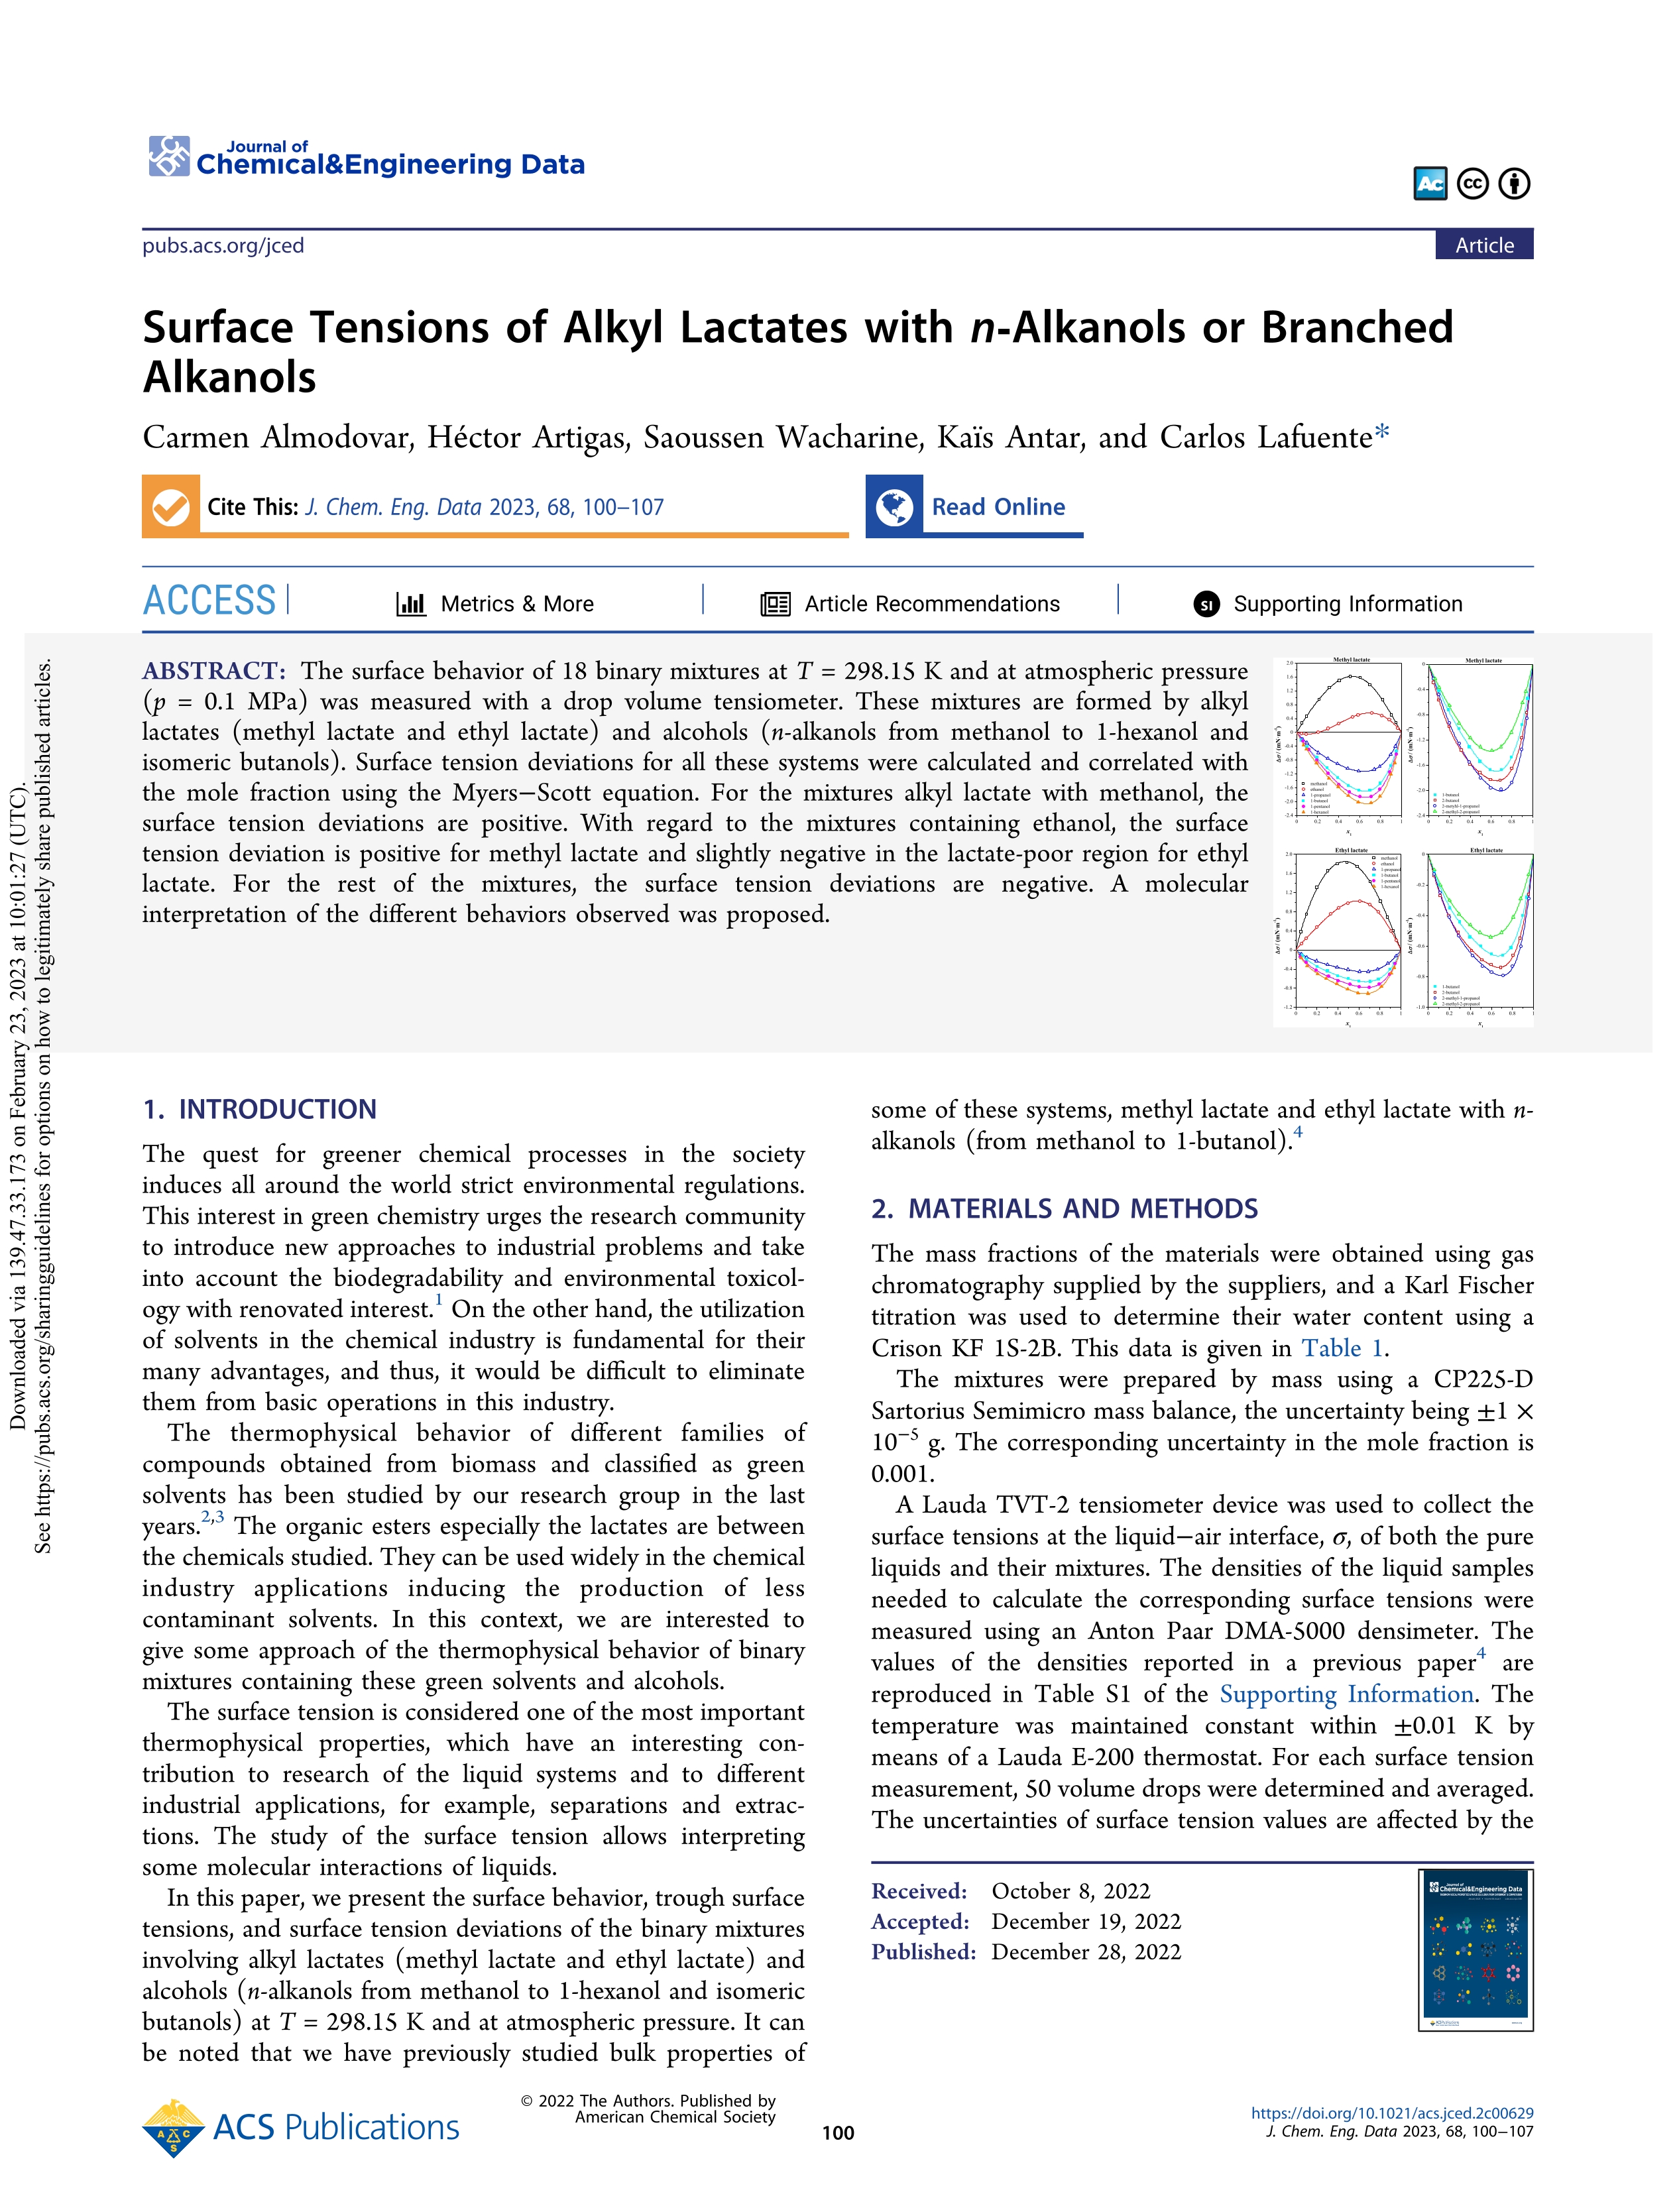 Surface tensions of Alkyl Lactates with n-Alkanols or branched Alkanols